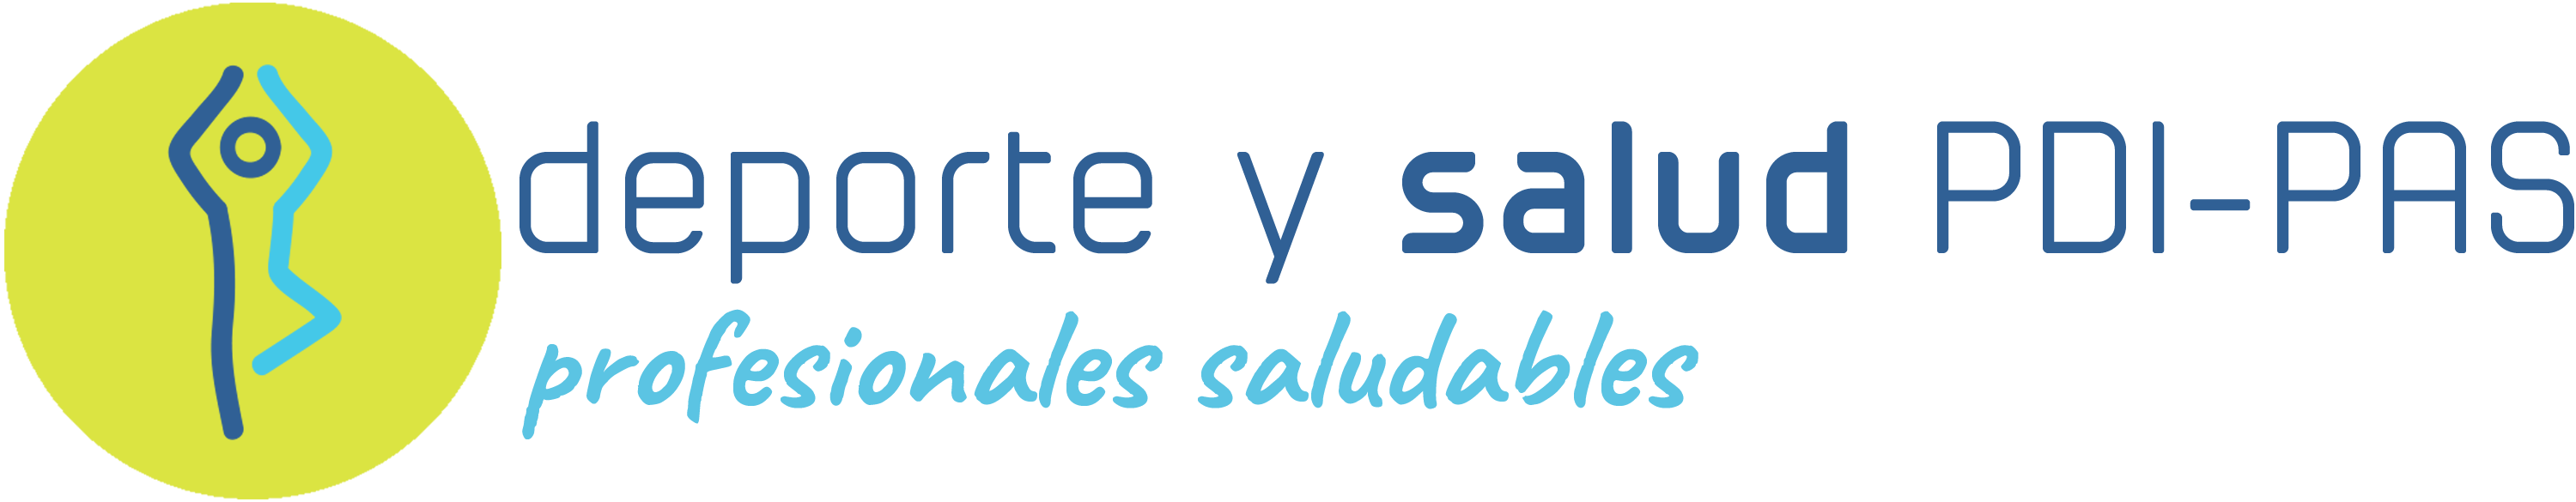 Profesionales Saludables